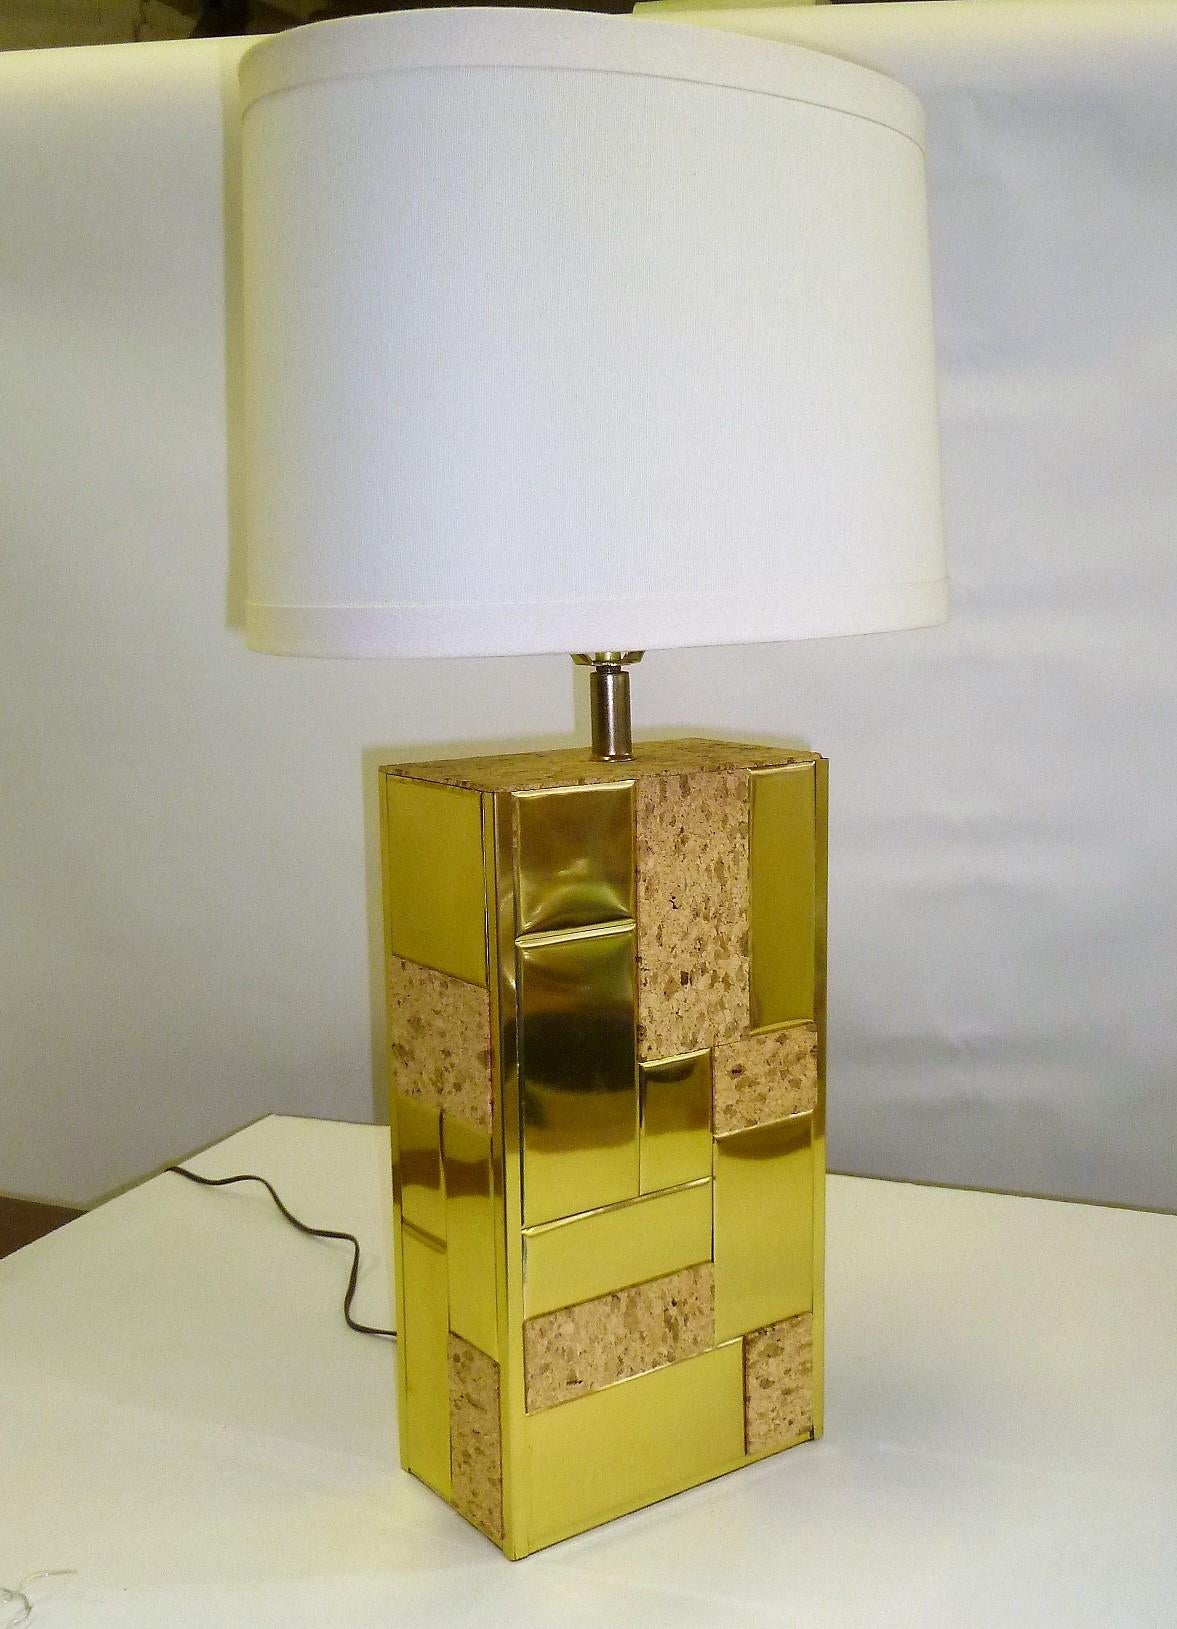 Beautiful brass tile and Cork Paul Evans Cityscape style 1970s Organic modern table lamp with a slim profile. Random brass tiles interspersed by Cork Tiles over a plinth form. Sleek Cityscape style. Just add your shade. Shade shown as